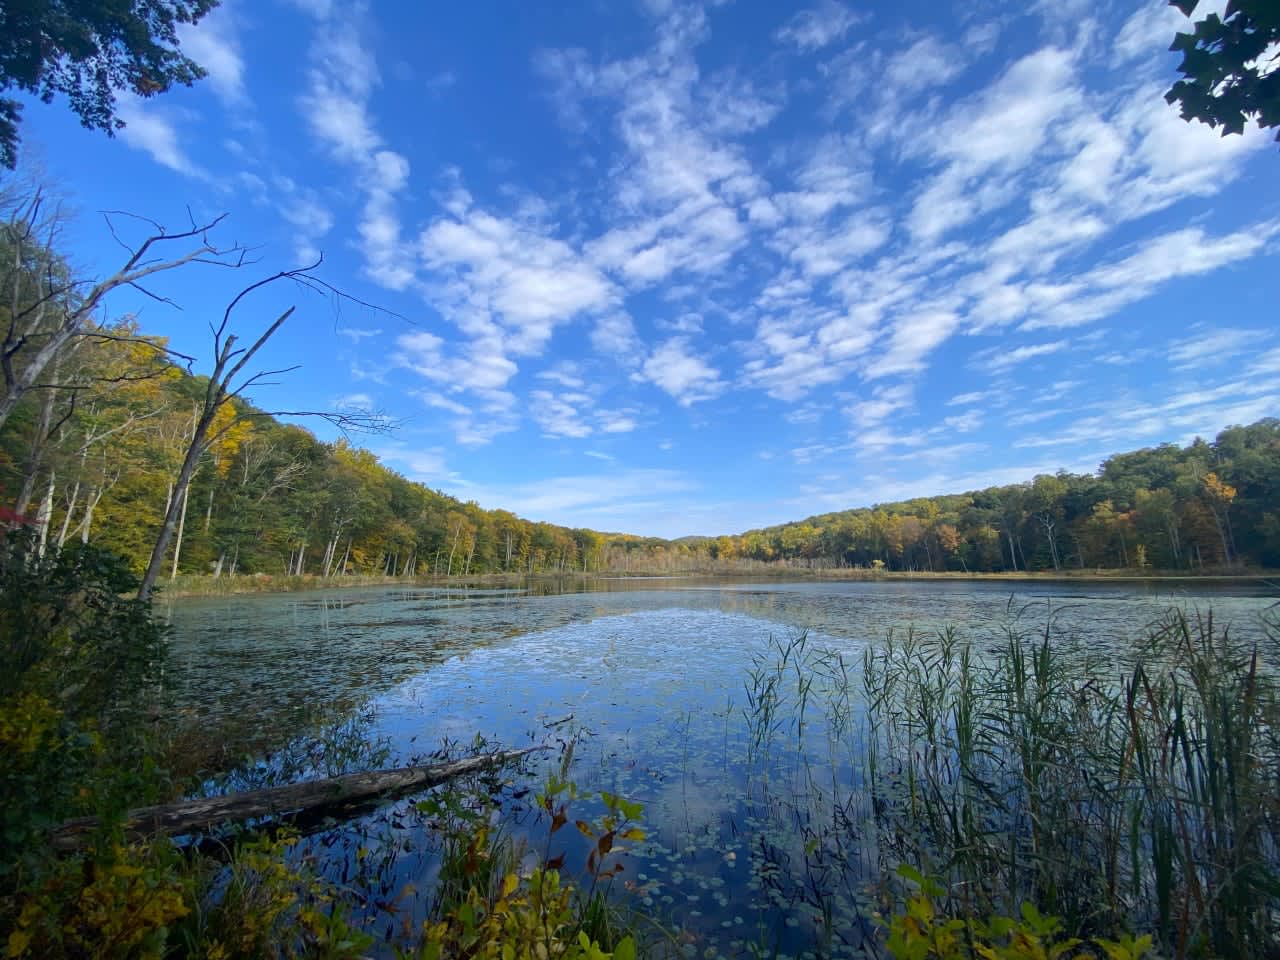 The 174-acre Hudson Valley property that will now be permanently protected features several swamps and ponds, as seen above.